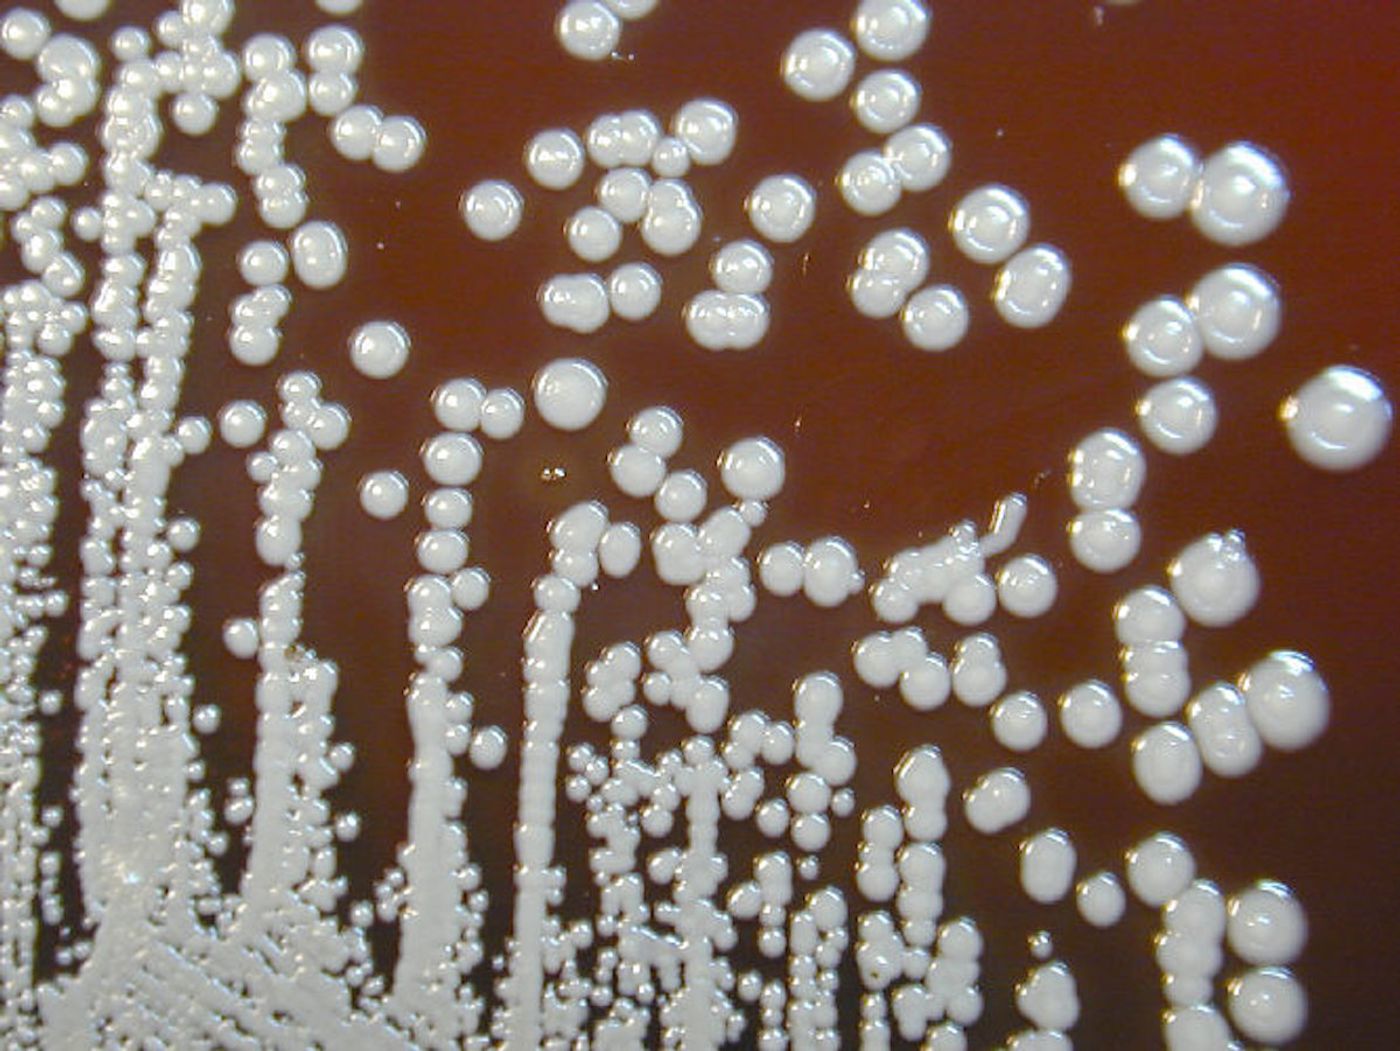 A close view of a bacterial growth culture plate with Burkholderia pseudomallei bacteria colonies 72 hours after inoculation. As incubation is extended, morphology changes. / Credit: CDC/ Courtesy of Larry Stauffer, Oregon State Public Health Laboratory